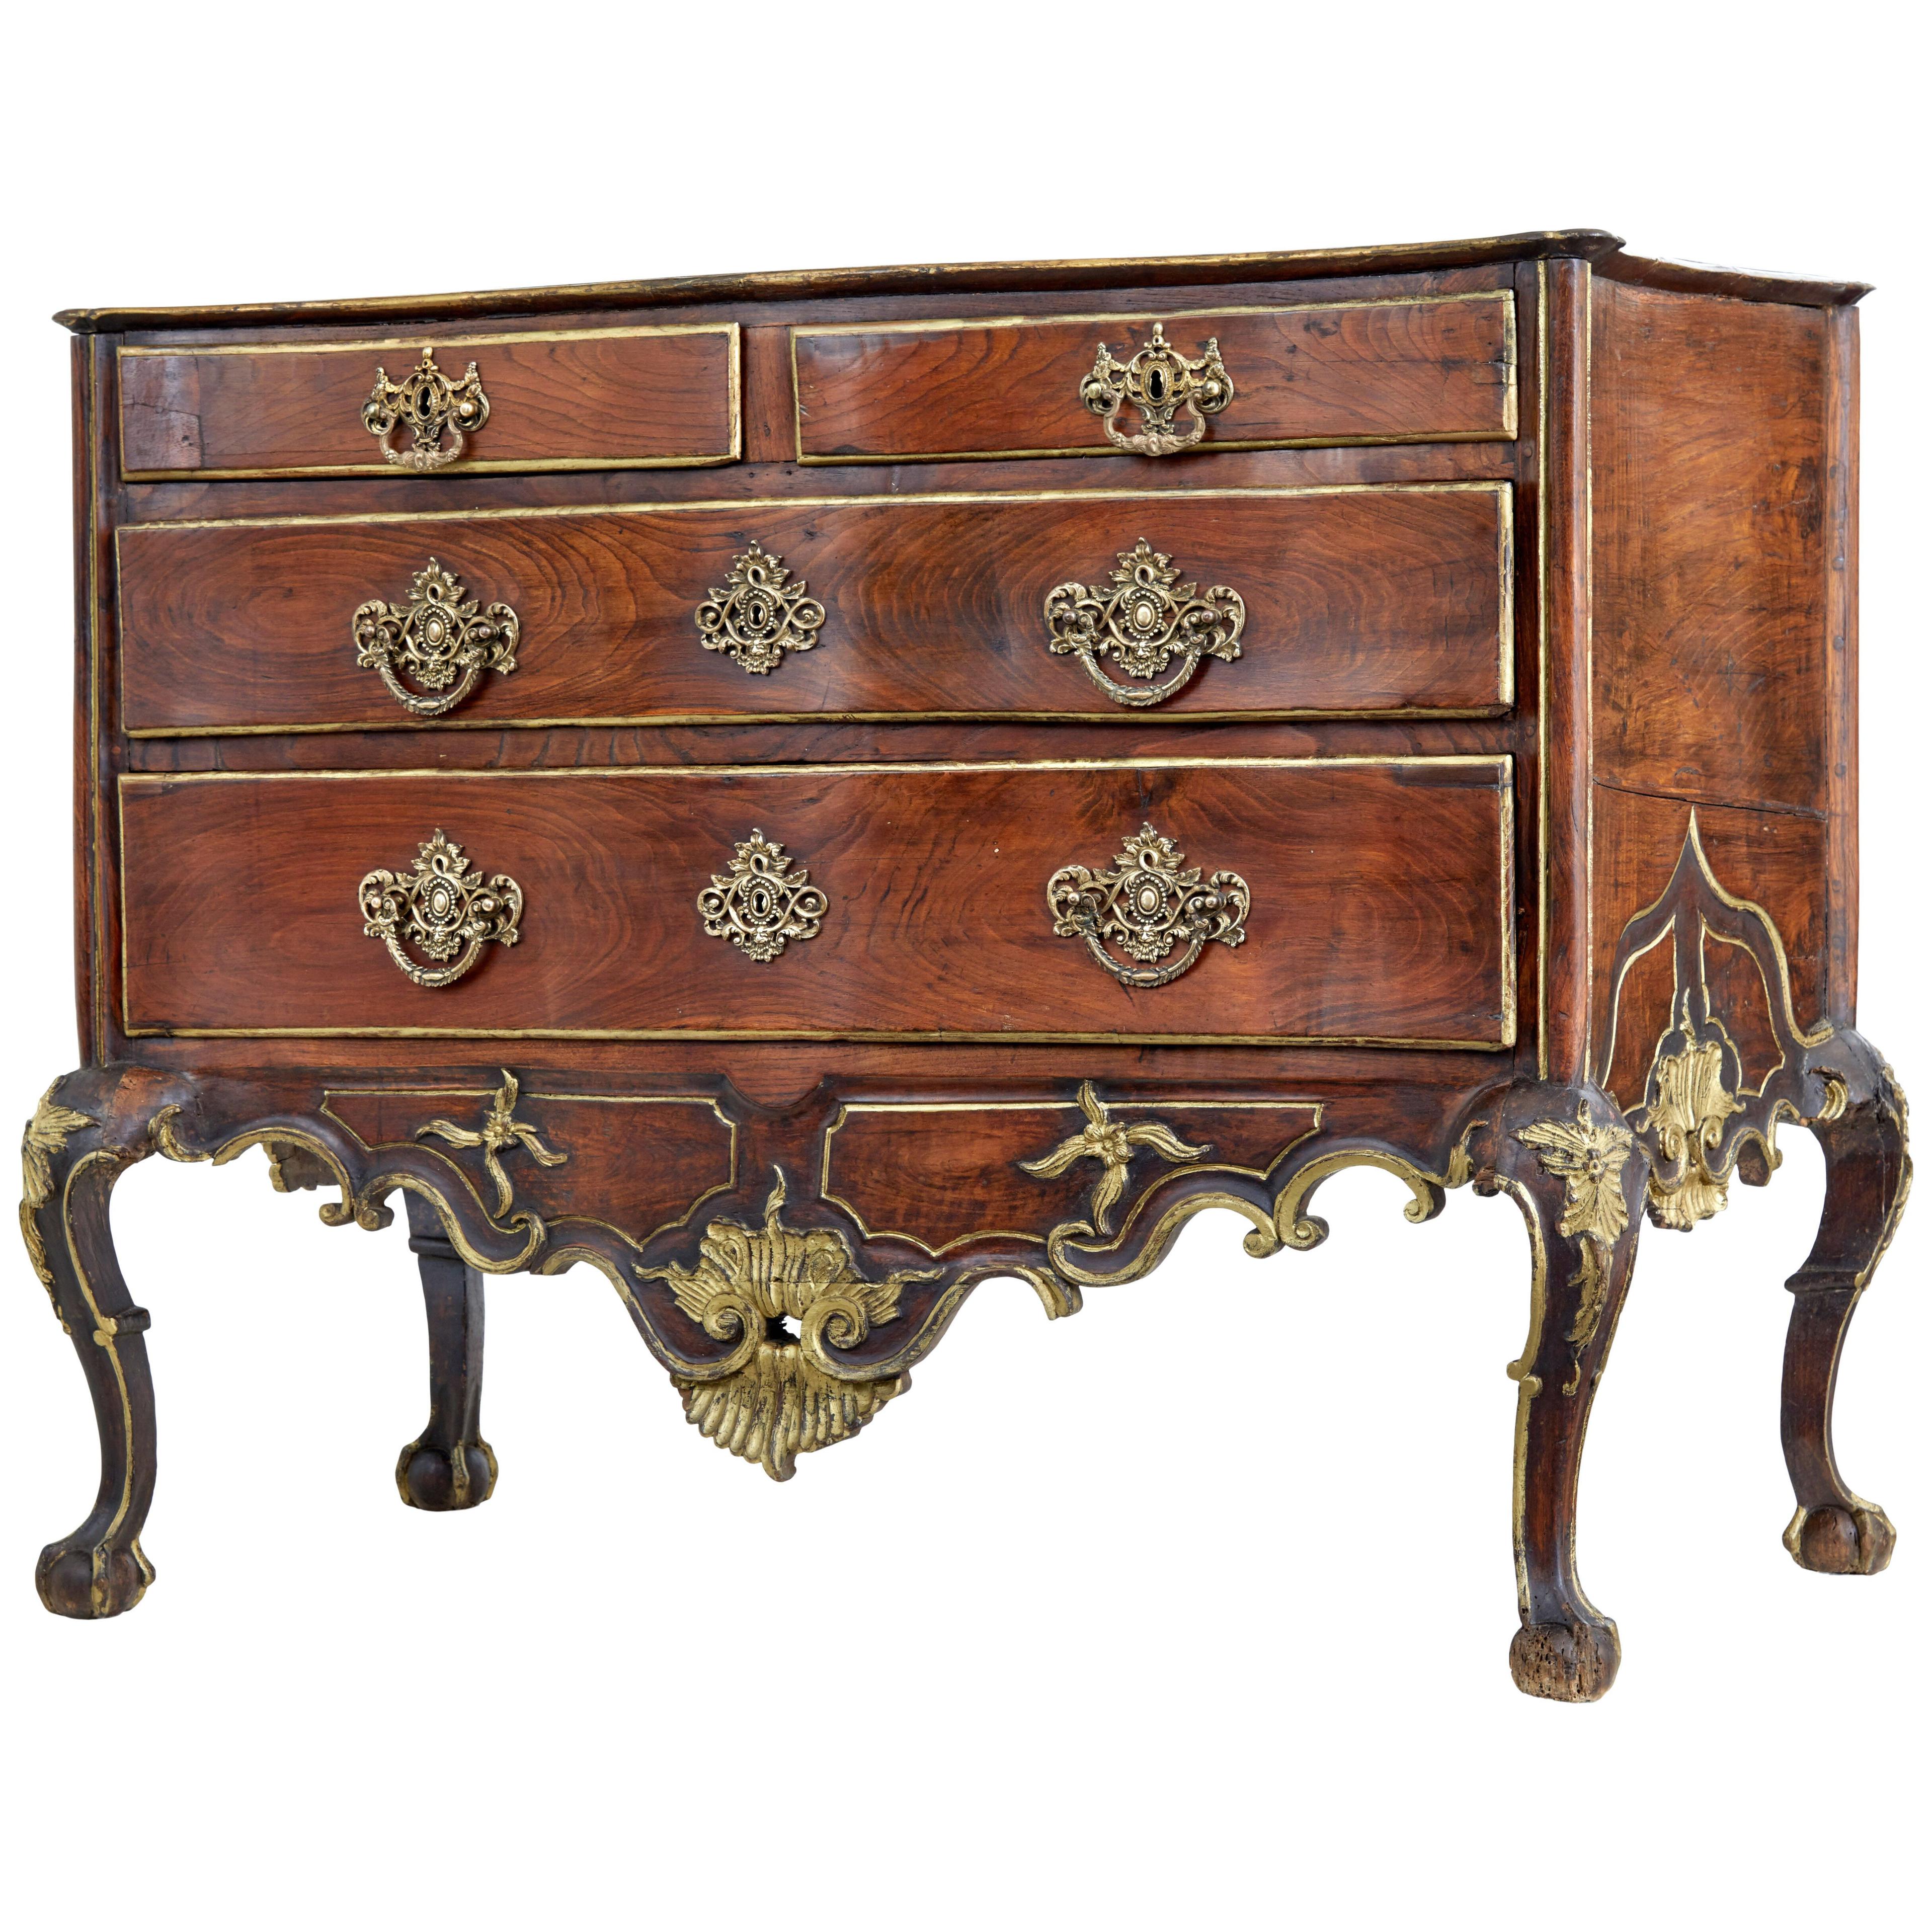 PORTUGUESE 18TH CENTURY CARVED WALNUT AND GILT COMMODE